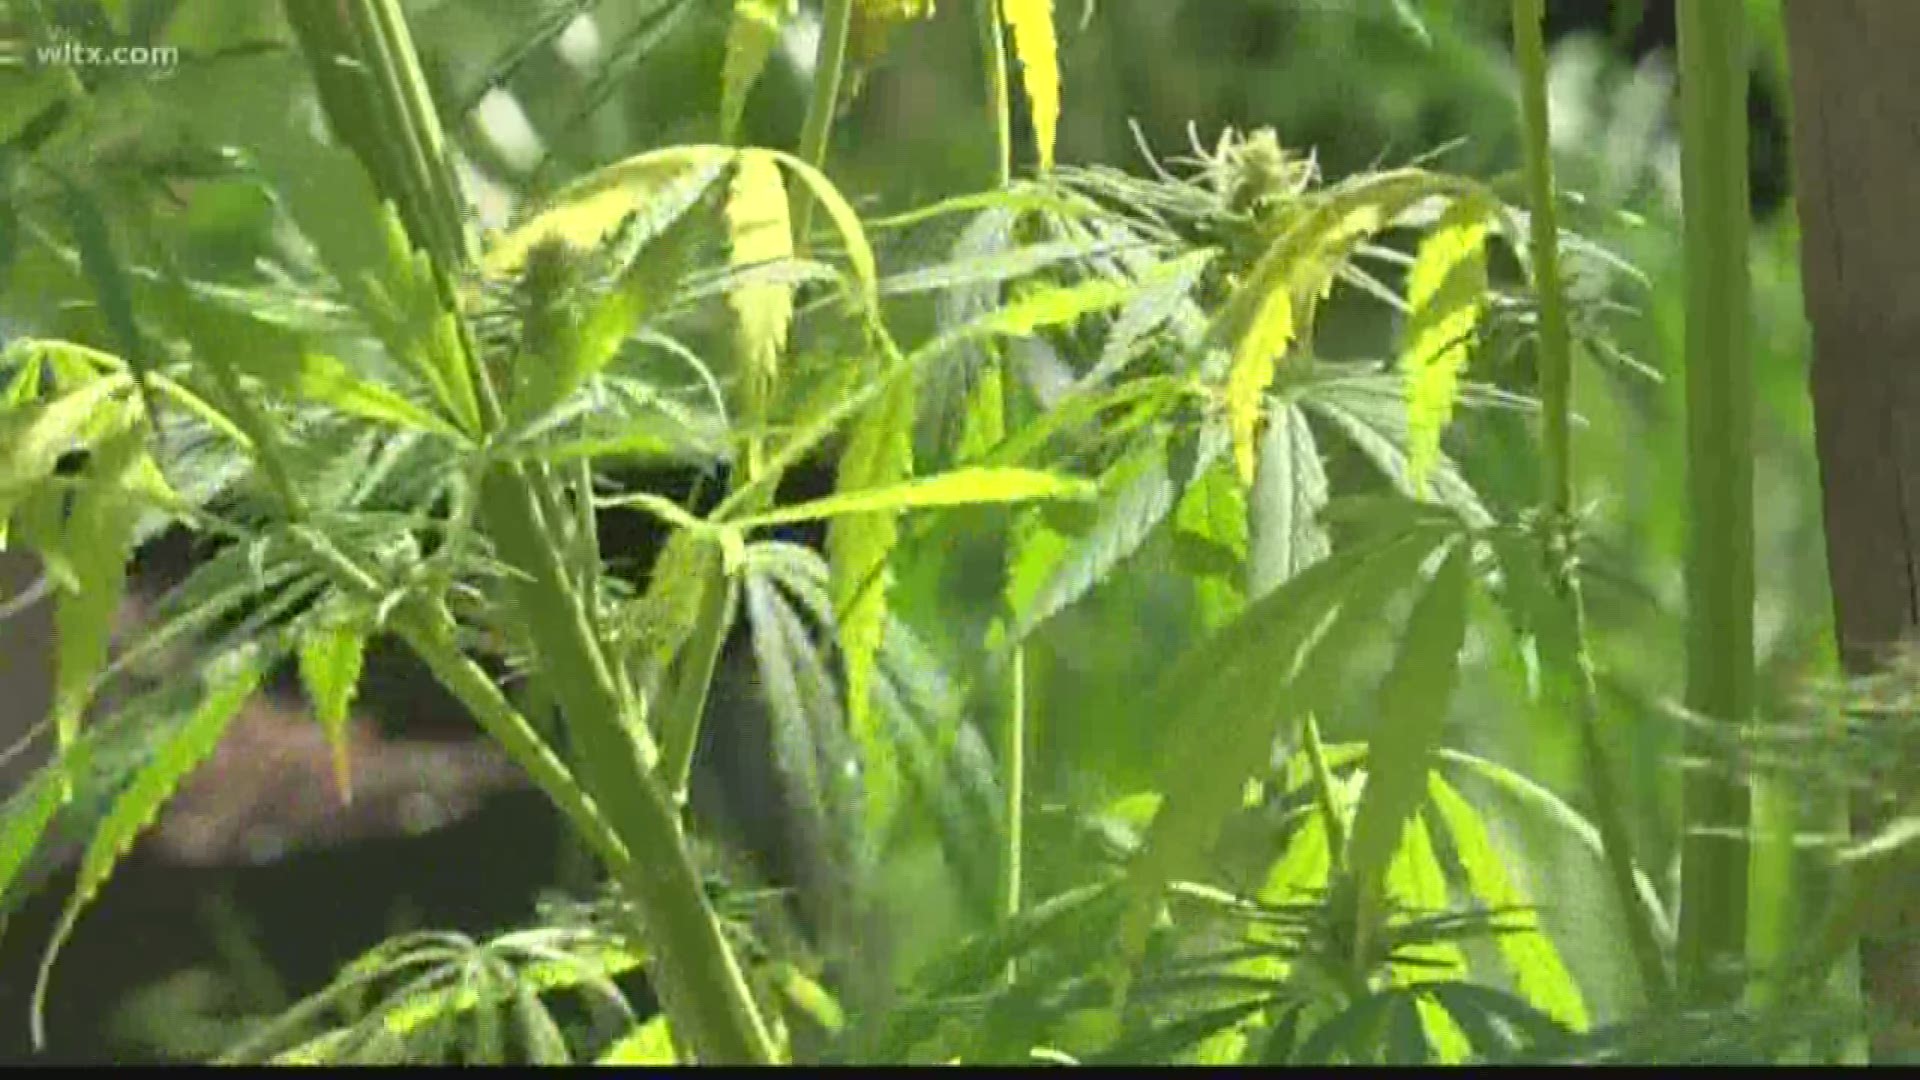 City Roots in Columbia is hoping to educate other farmers on how on the production process of growing hemp.